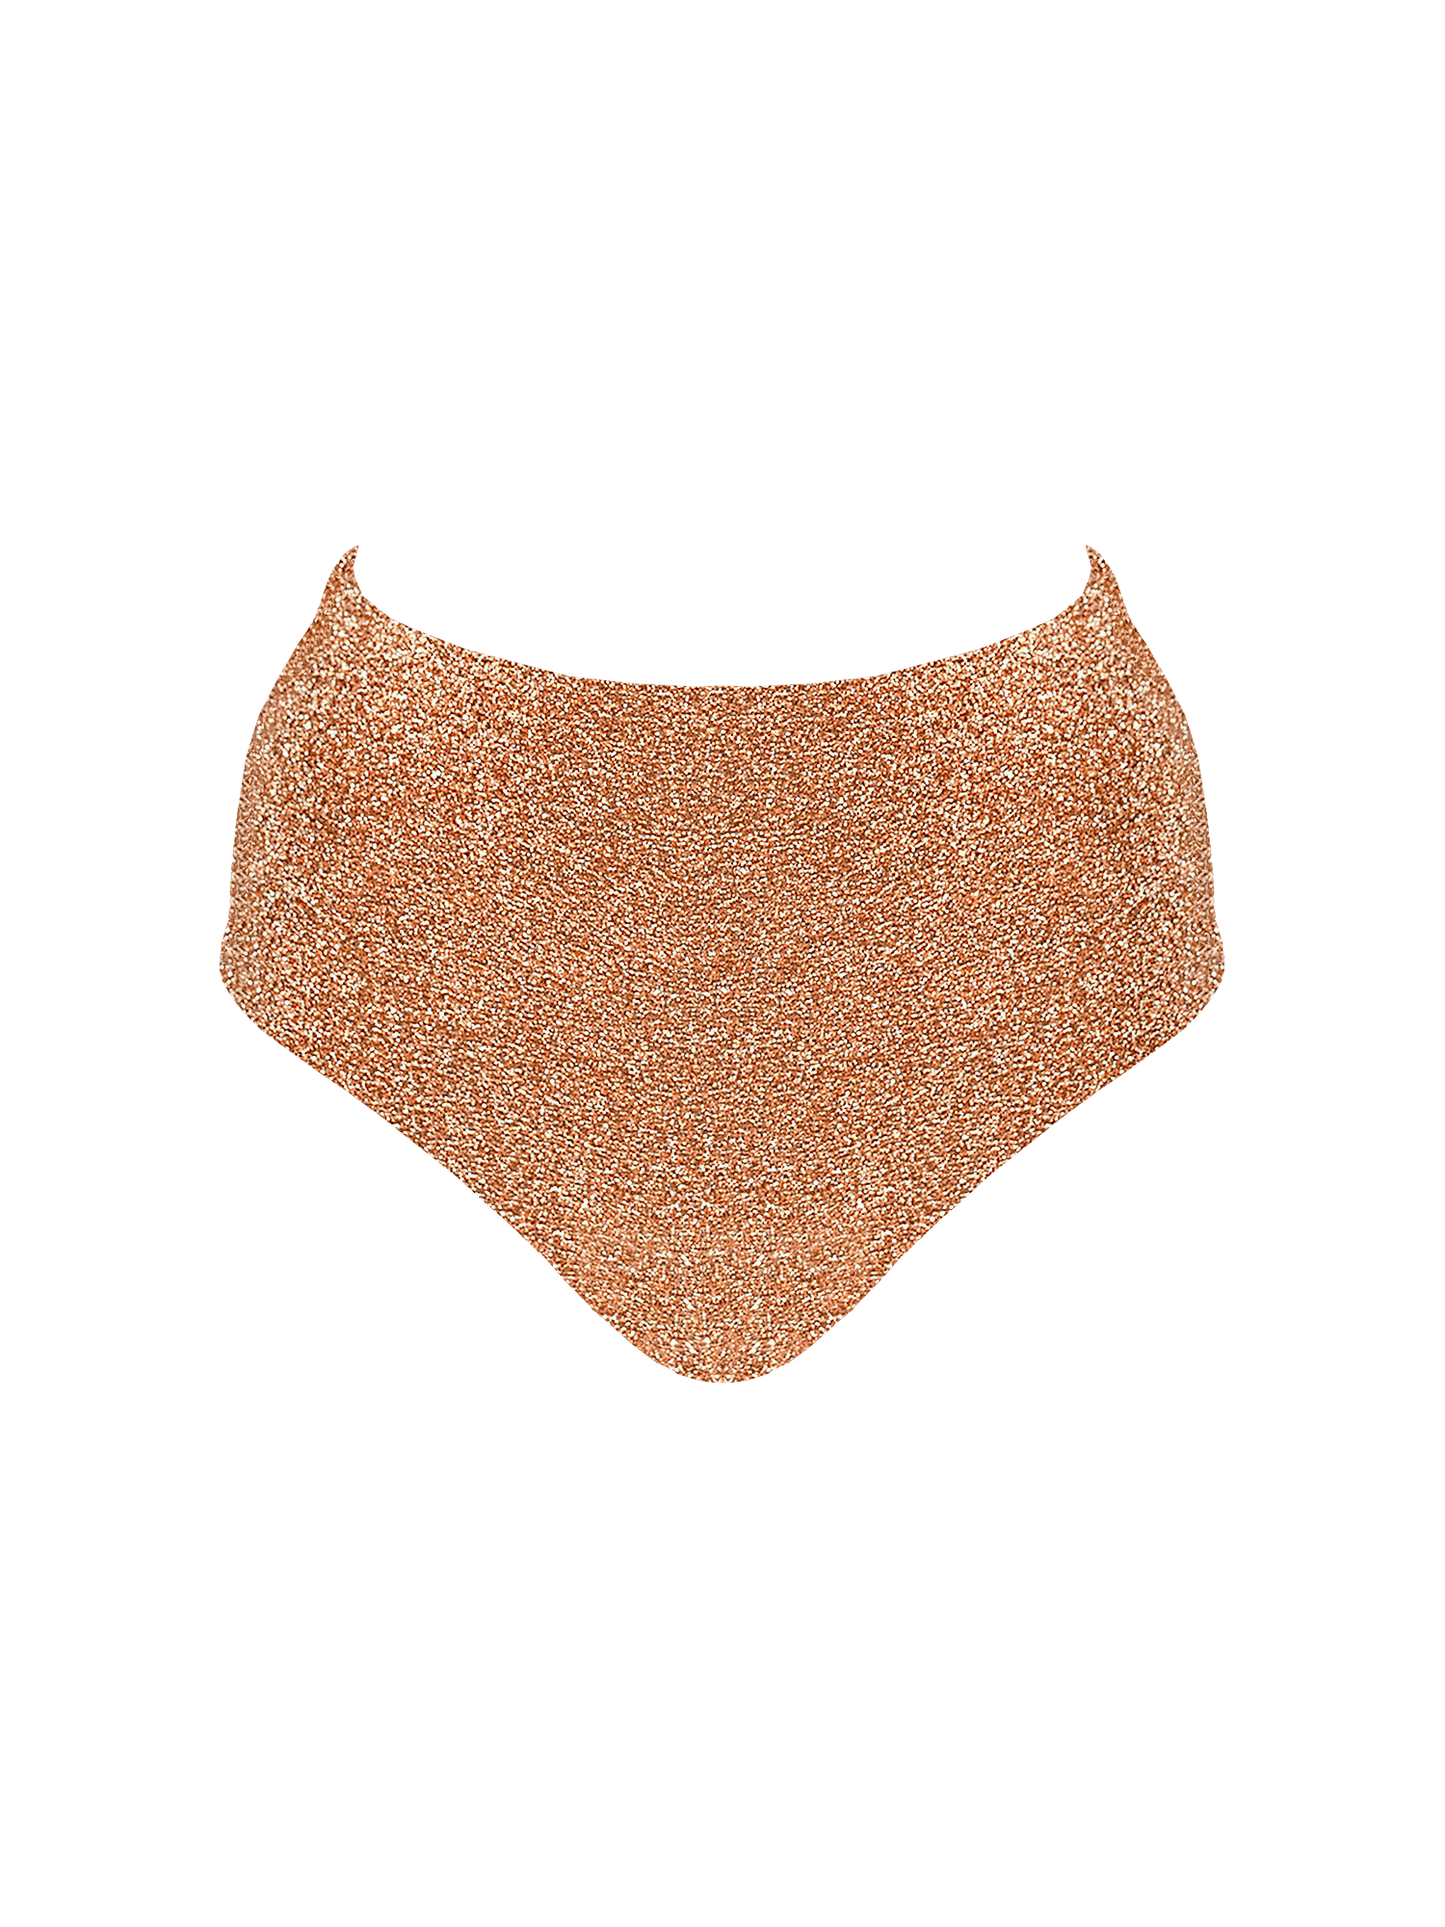 Stardust ~ Classic High Waisted Pantie - Light Copper